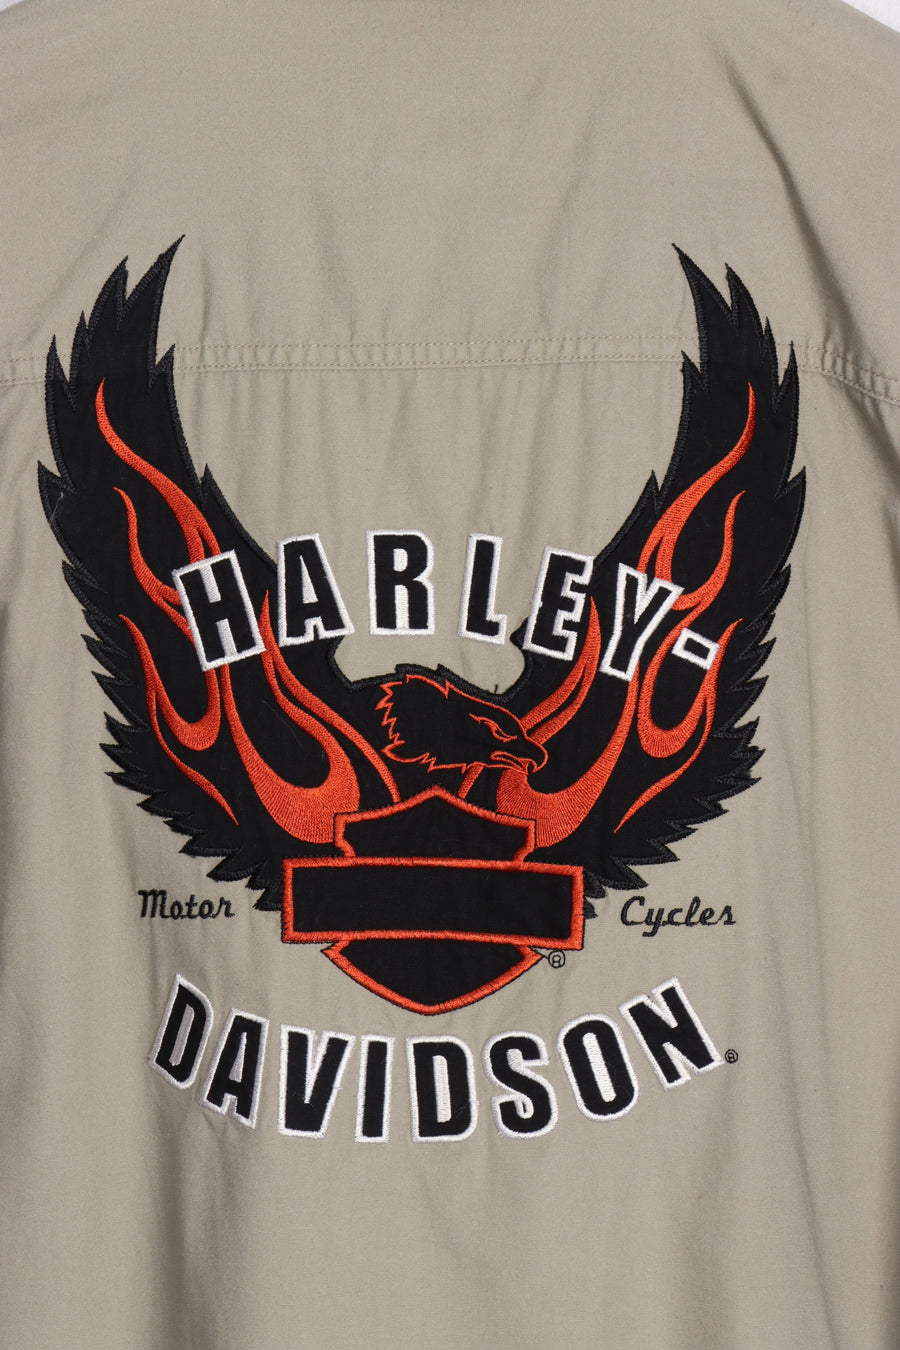 HARLEY DAVIDSON Embroidered Flame & Wings Long Sleeve Shirt (L-XL)